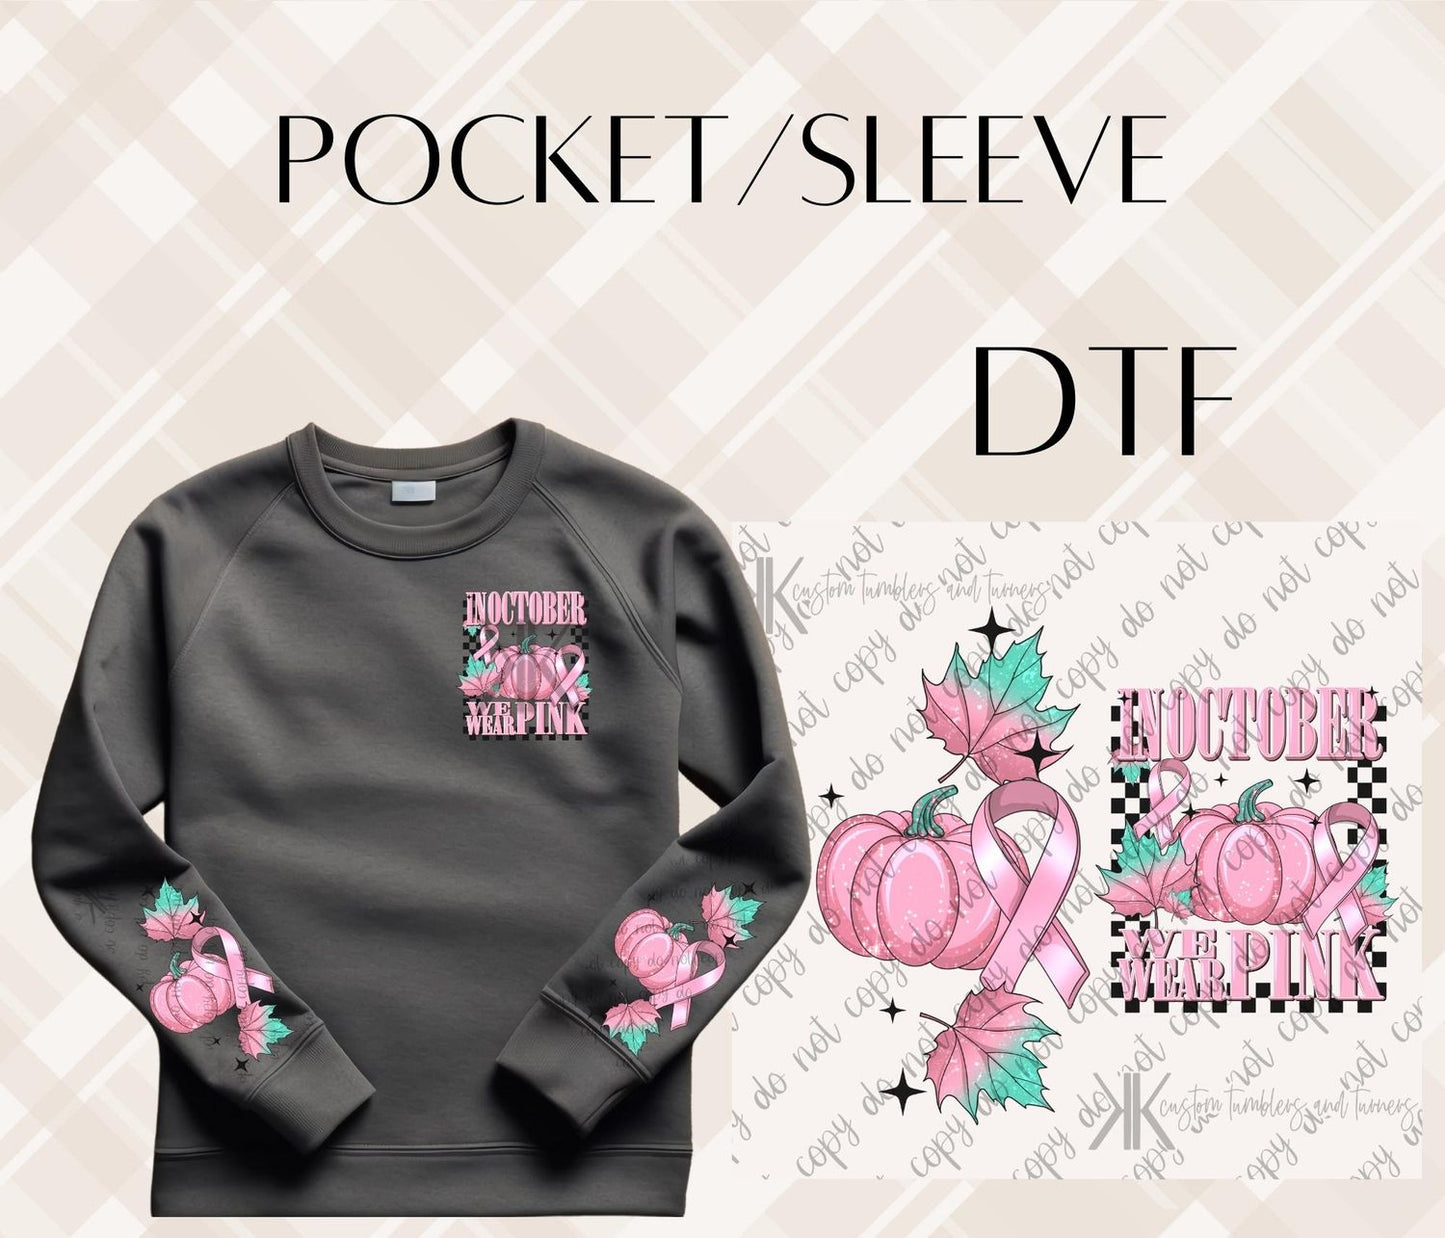 IN OCTOBER WE WEAR PINK DTF/UVDTF (POCKET & SLEEVE OPTIONS AVAIL)